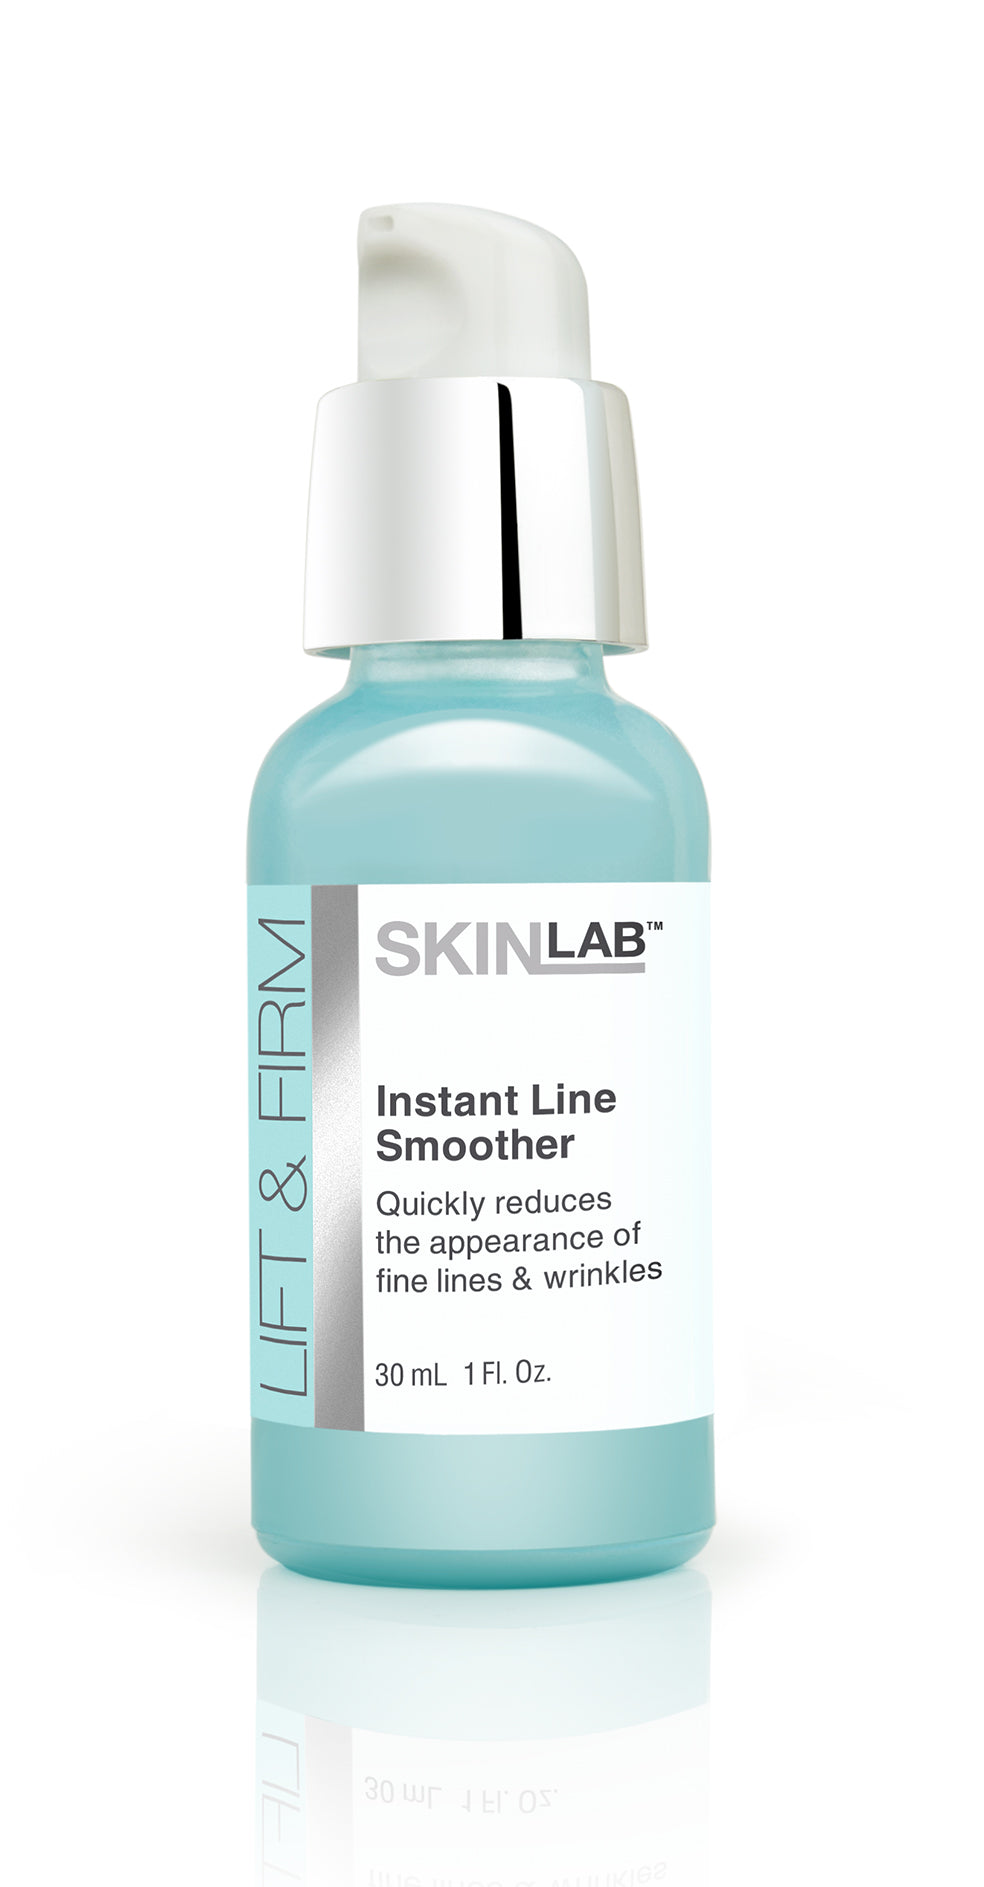 SKINLAB Lift & Firm Instant Line Smoother, 30 mL (1 Fl. oz) - ADDROS.COM